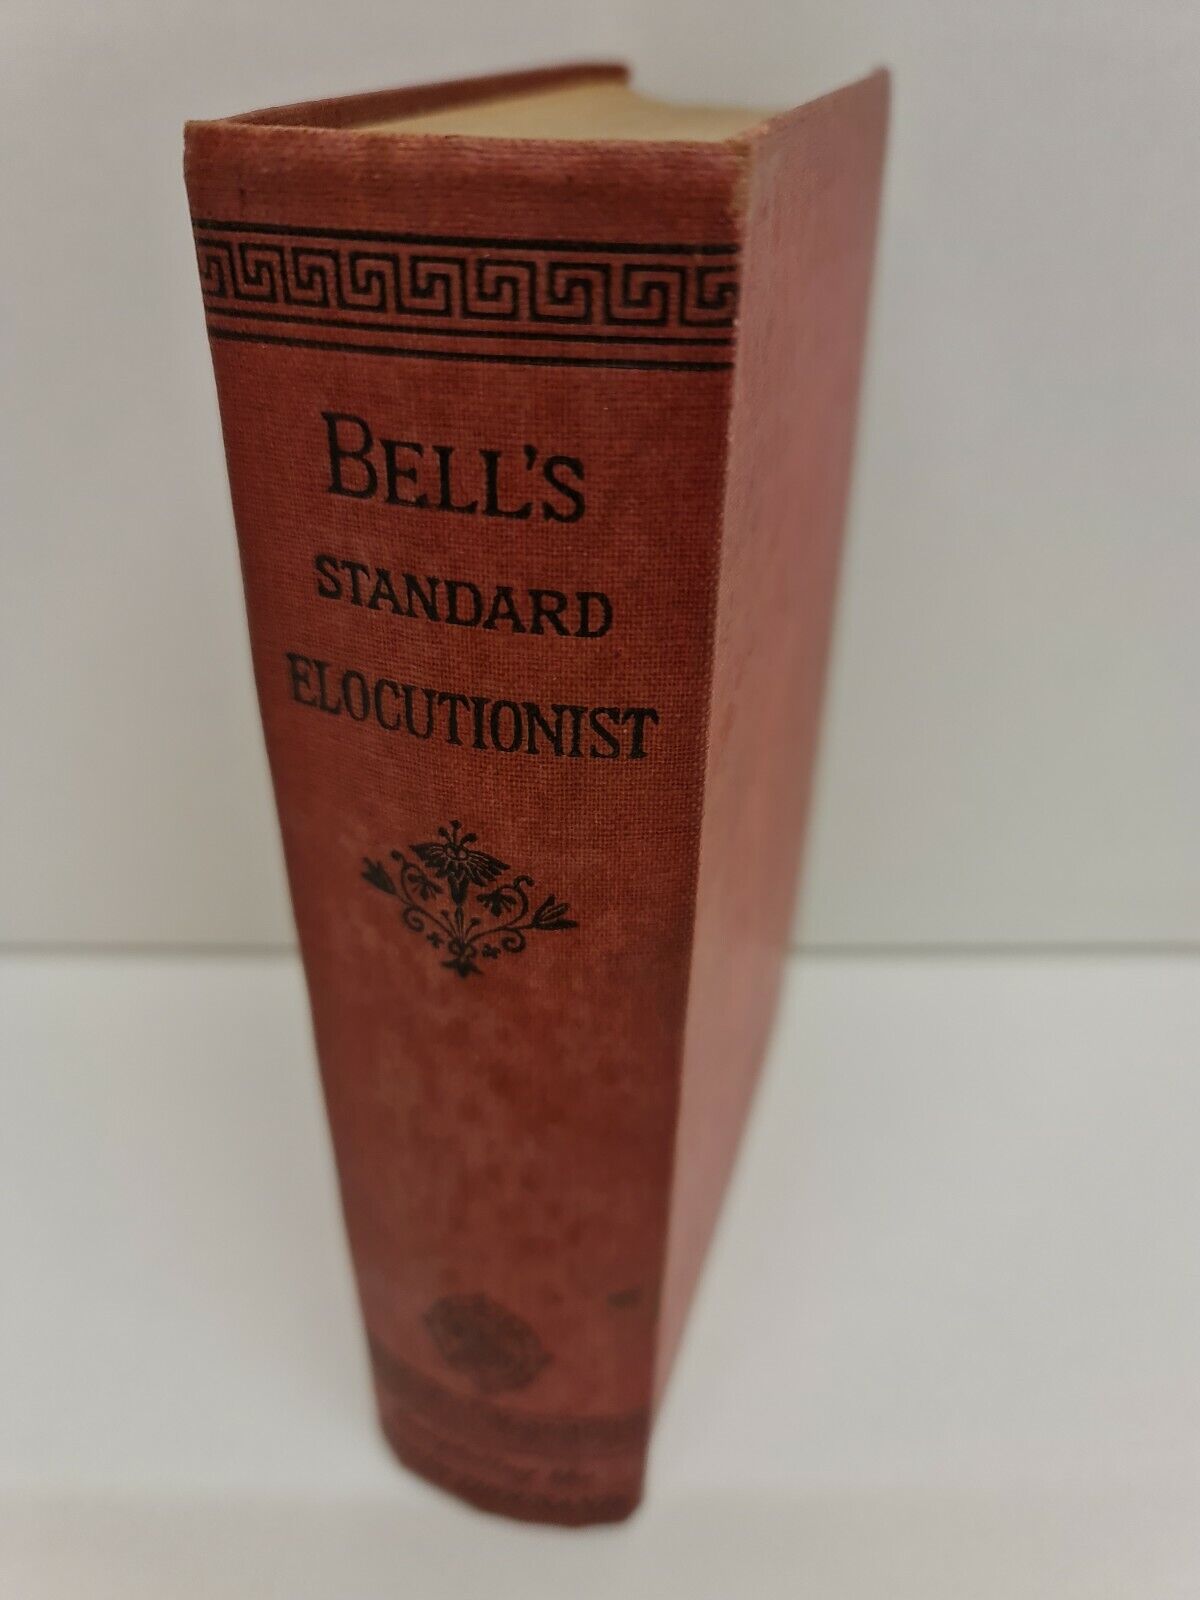 Bell's Standard Elocutionist by David Charles Bell -(1892)